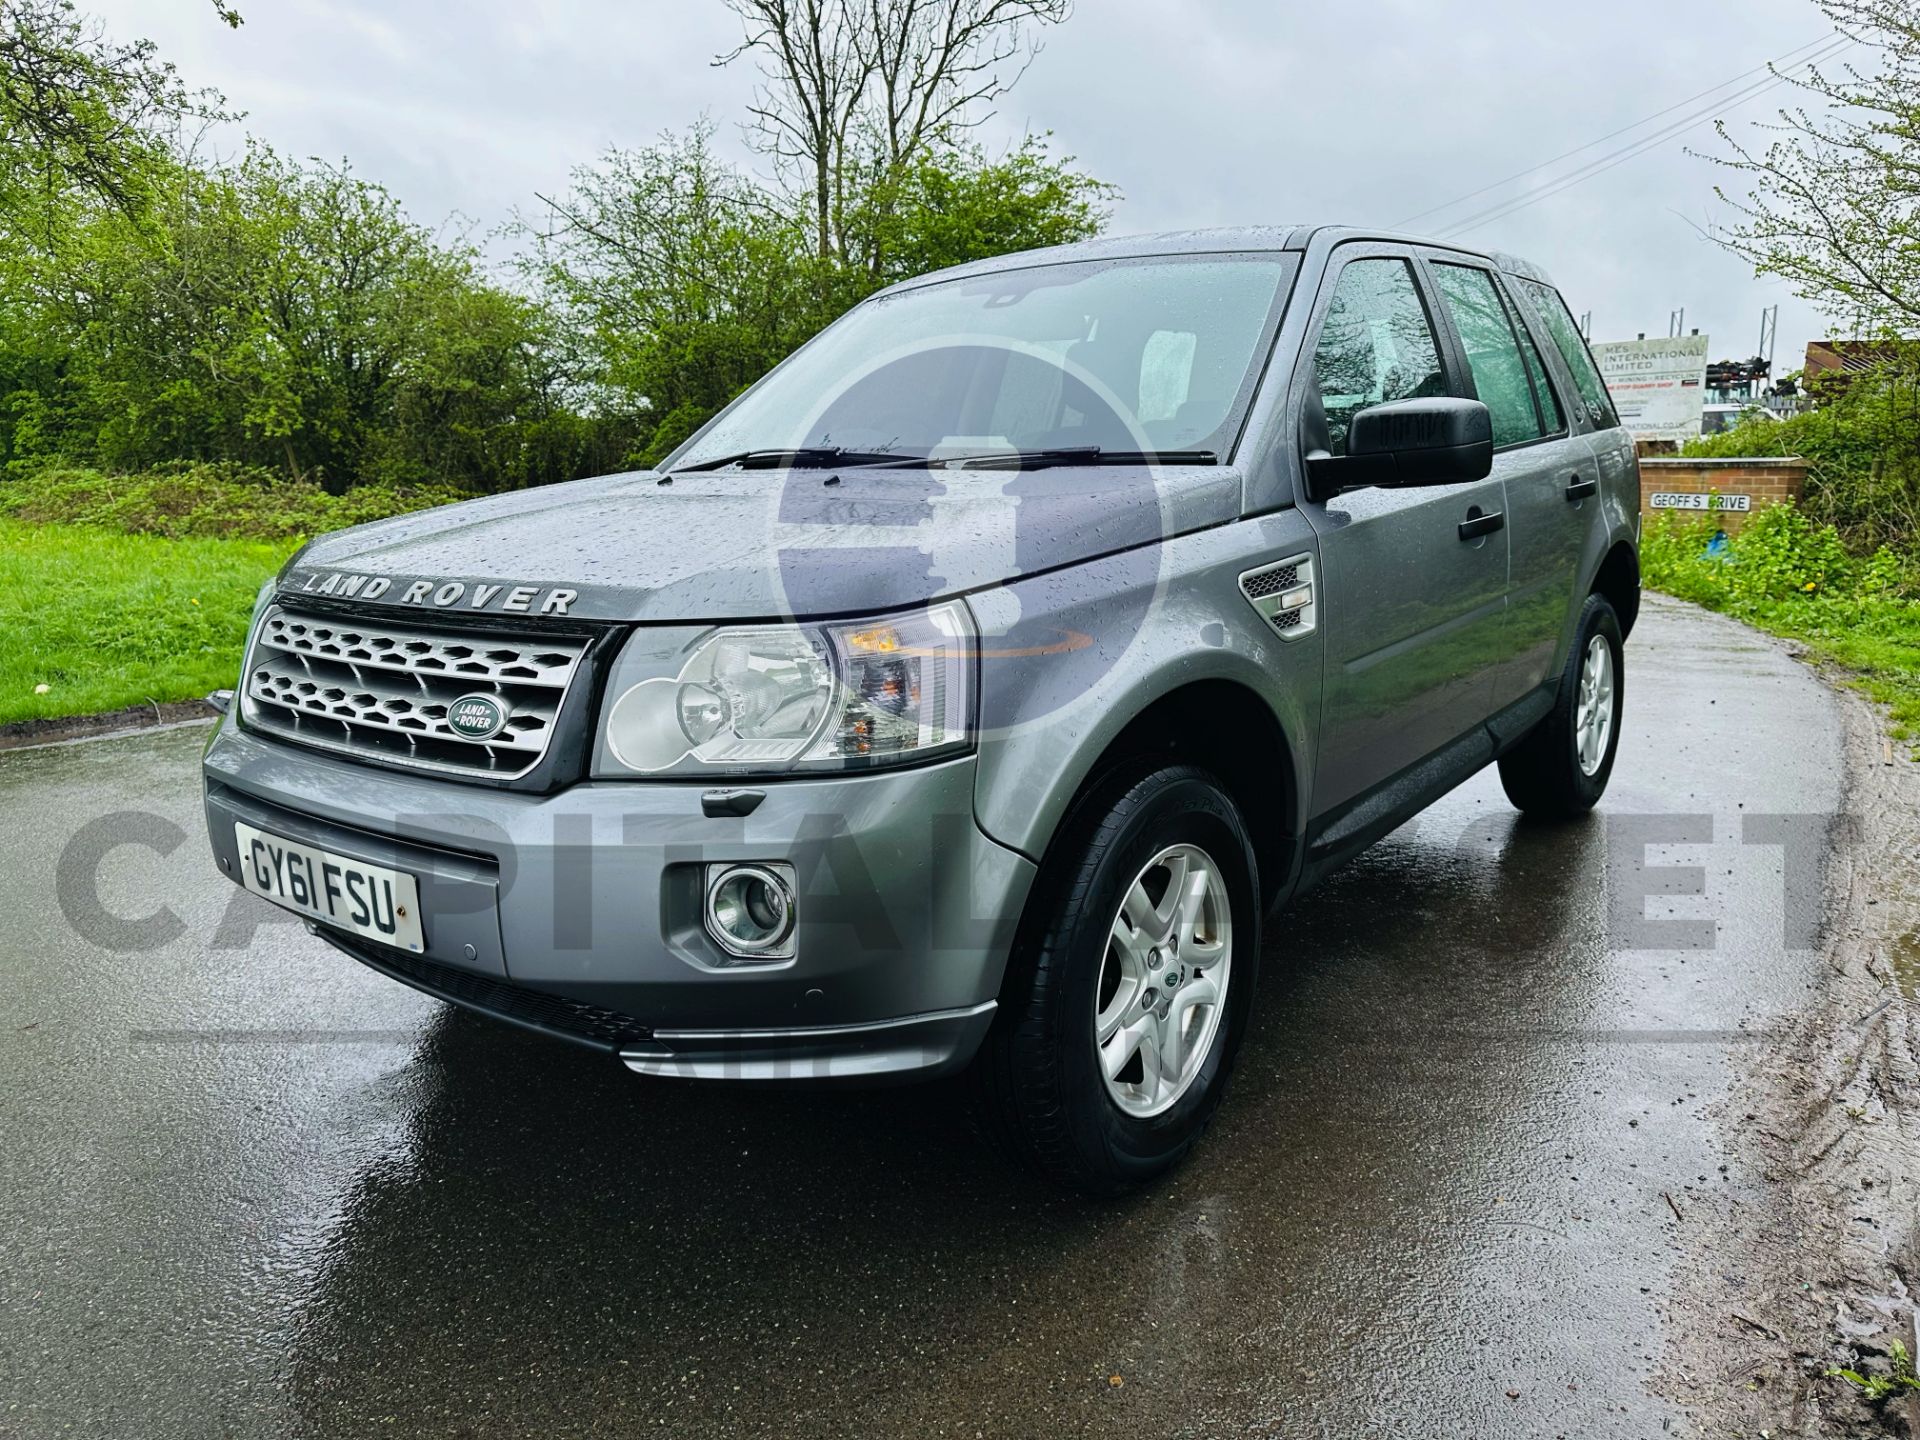 (ON SALE) LANDROVER FREELANDER 2.2TD4 S EDITION "AUTO - 2012 MODEL - AIR CON - FSH - Image 4 of 33